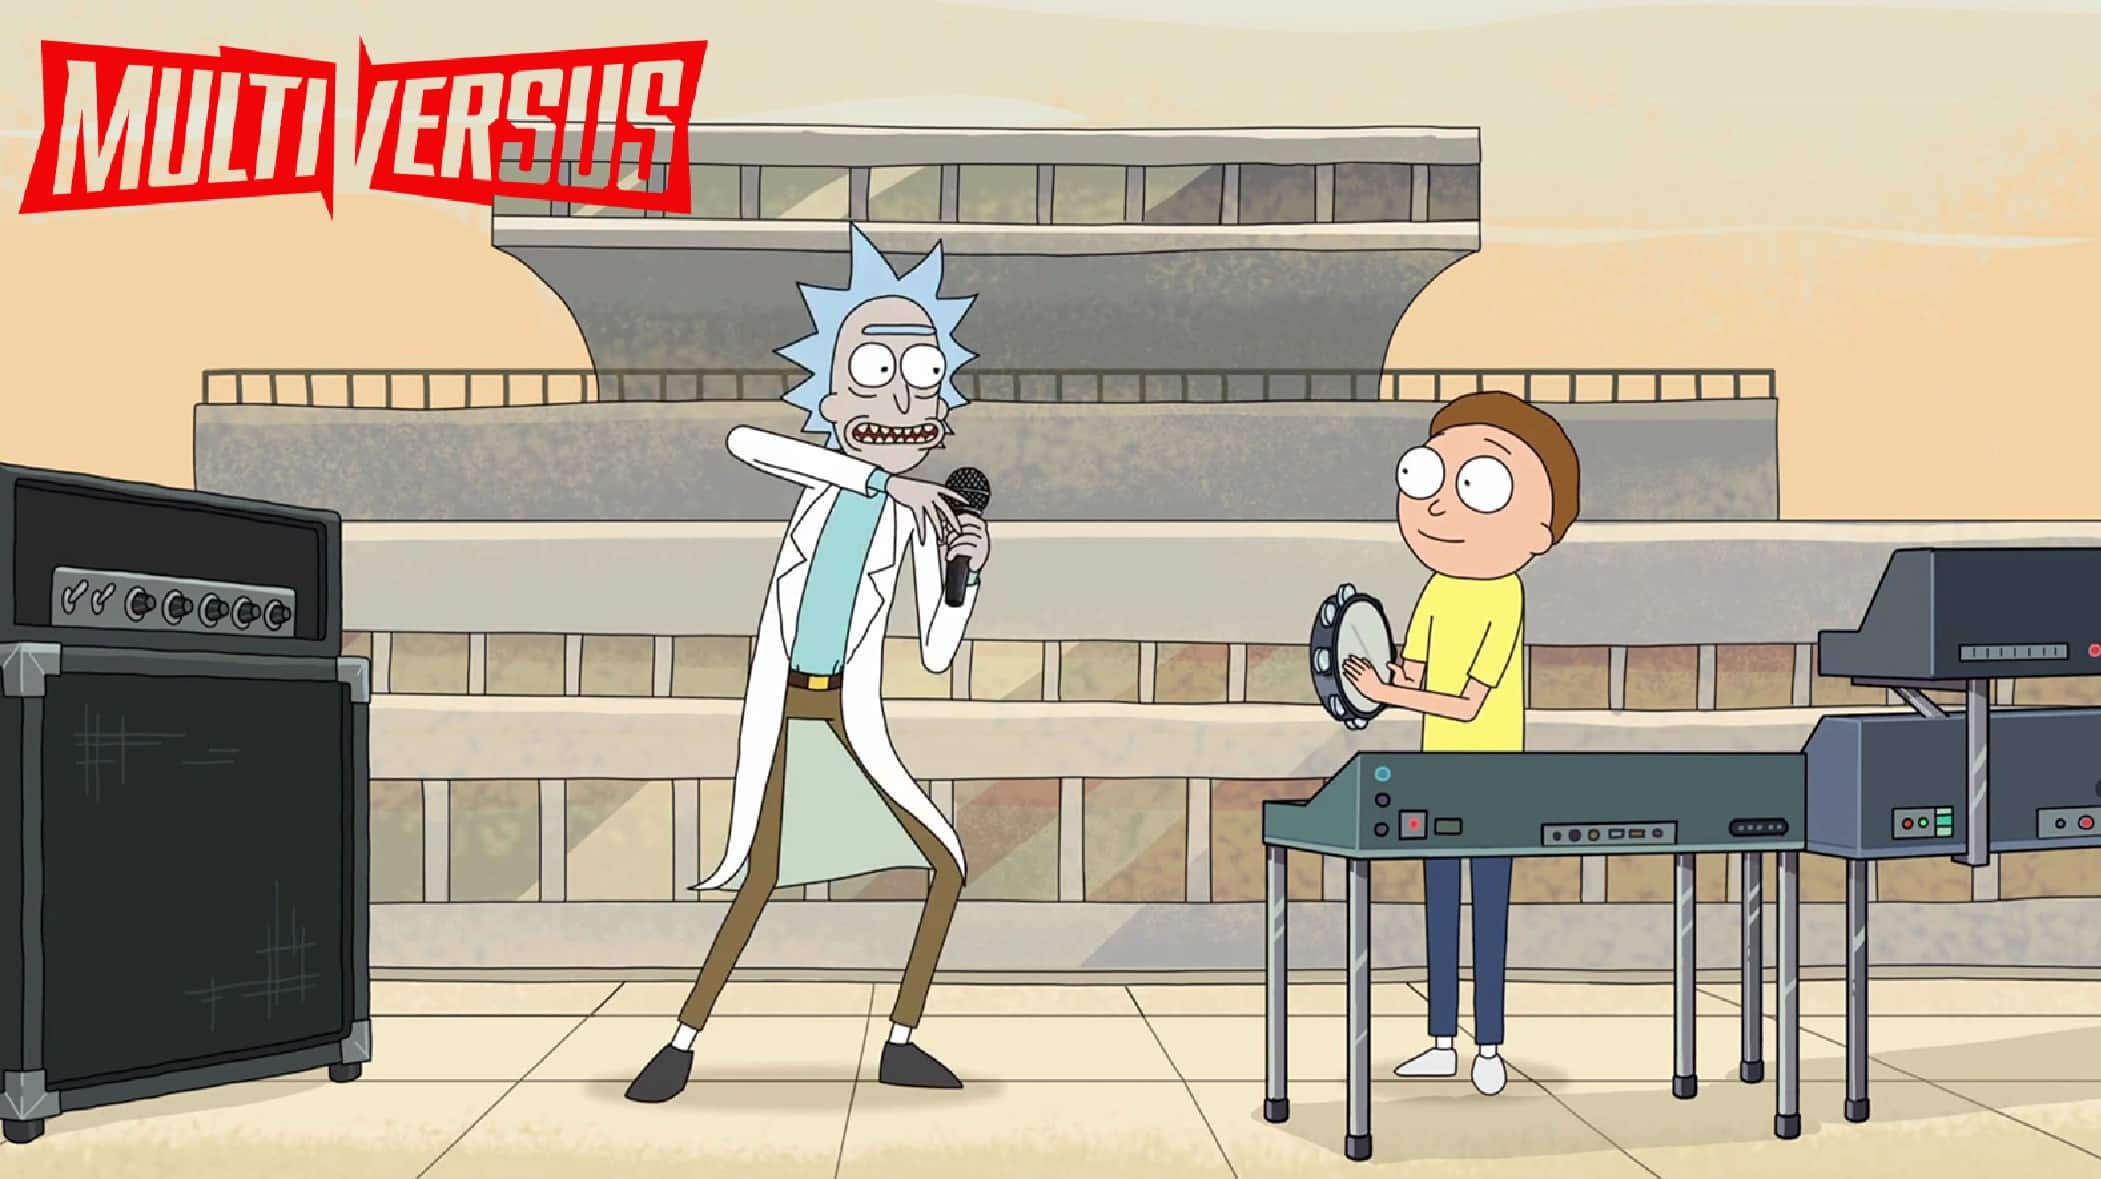 Rick and Morty episode with MultiVersus logo